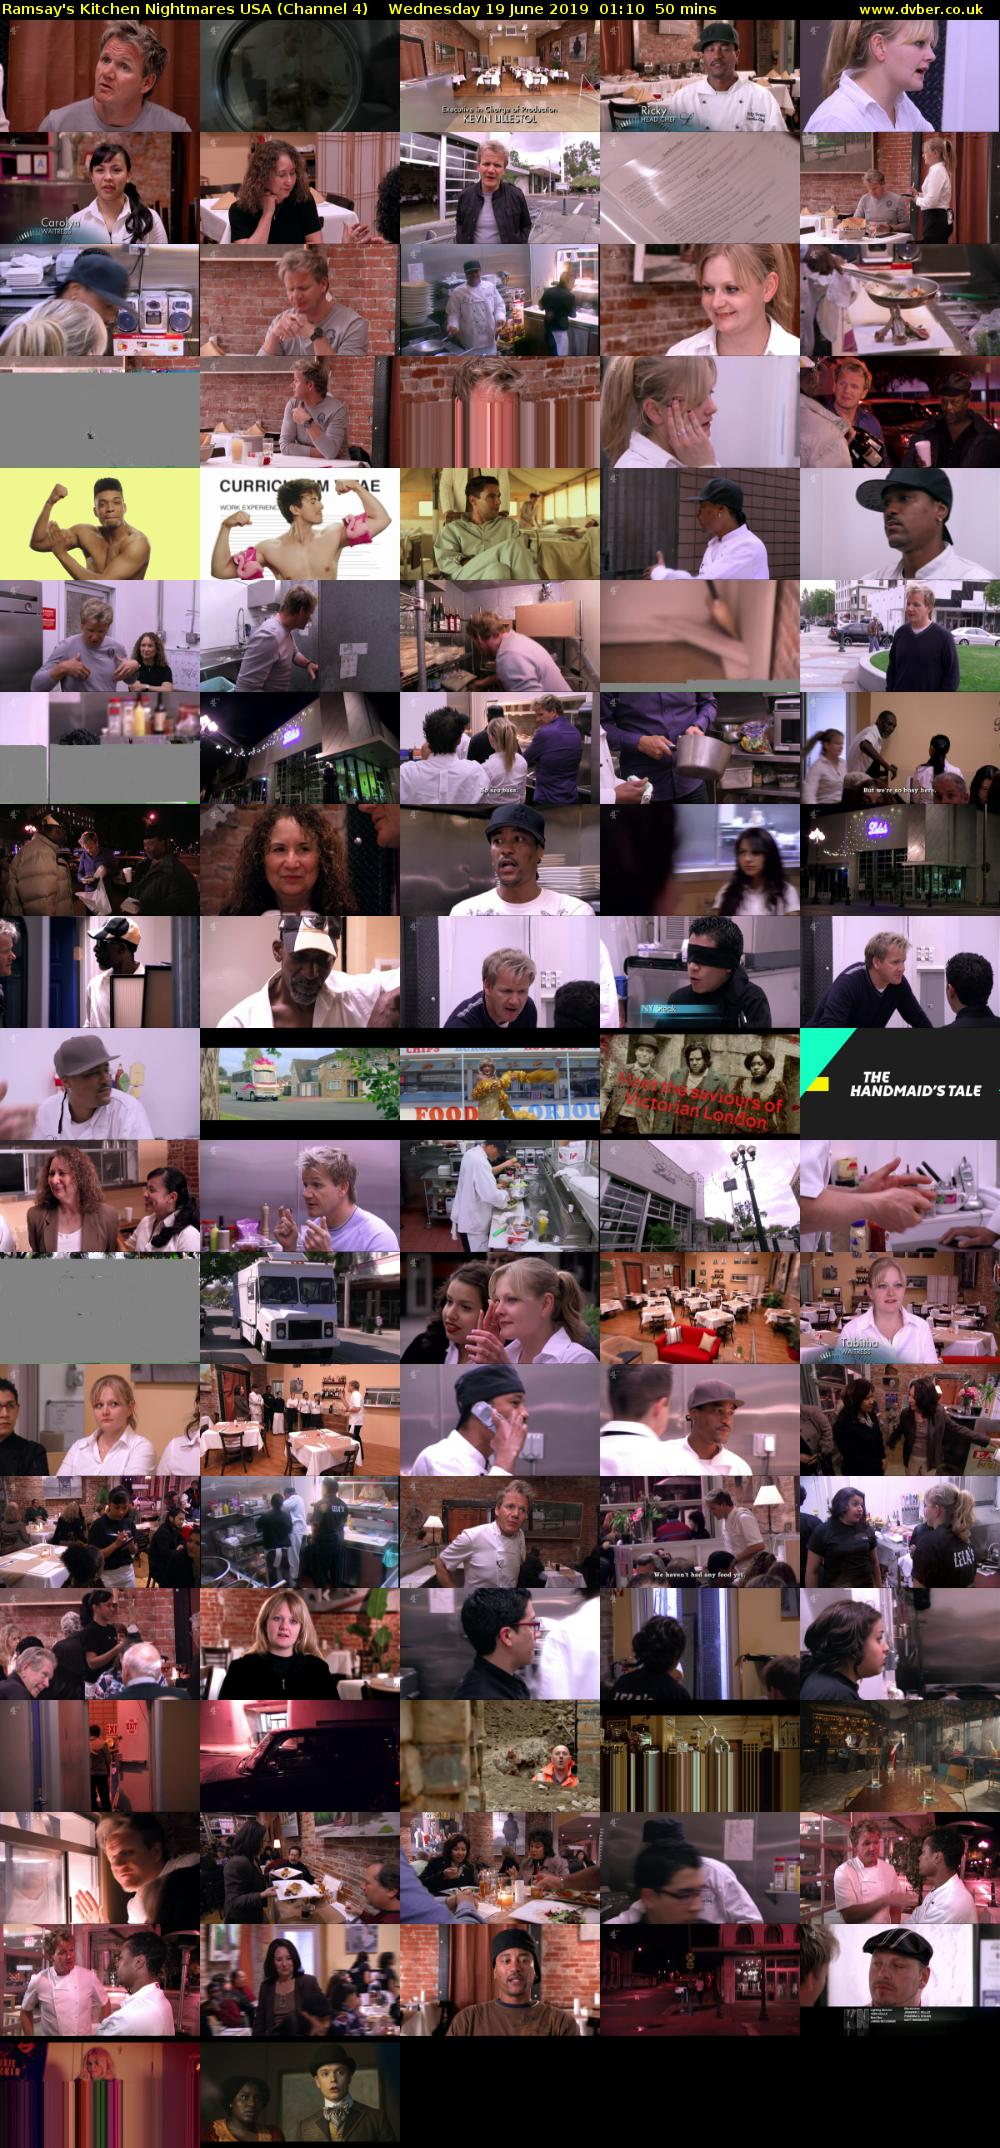 Ramsay's Kitchen Nightmares USA (Channel 4) Wednesday 19 June 2019 01:10 - 02:00